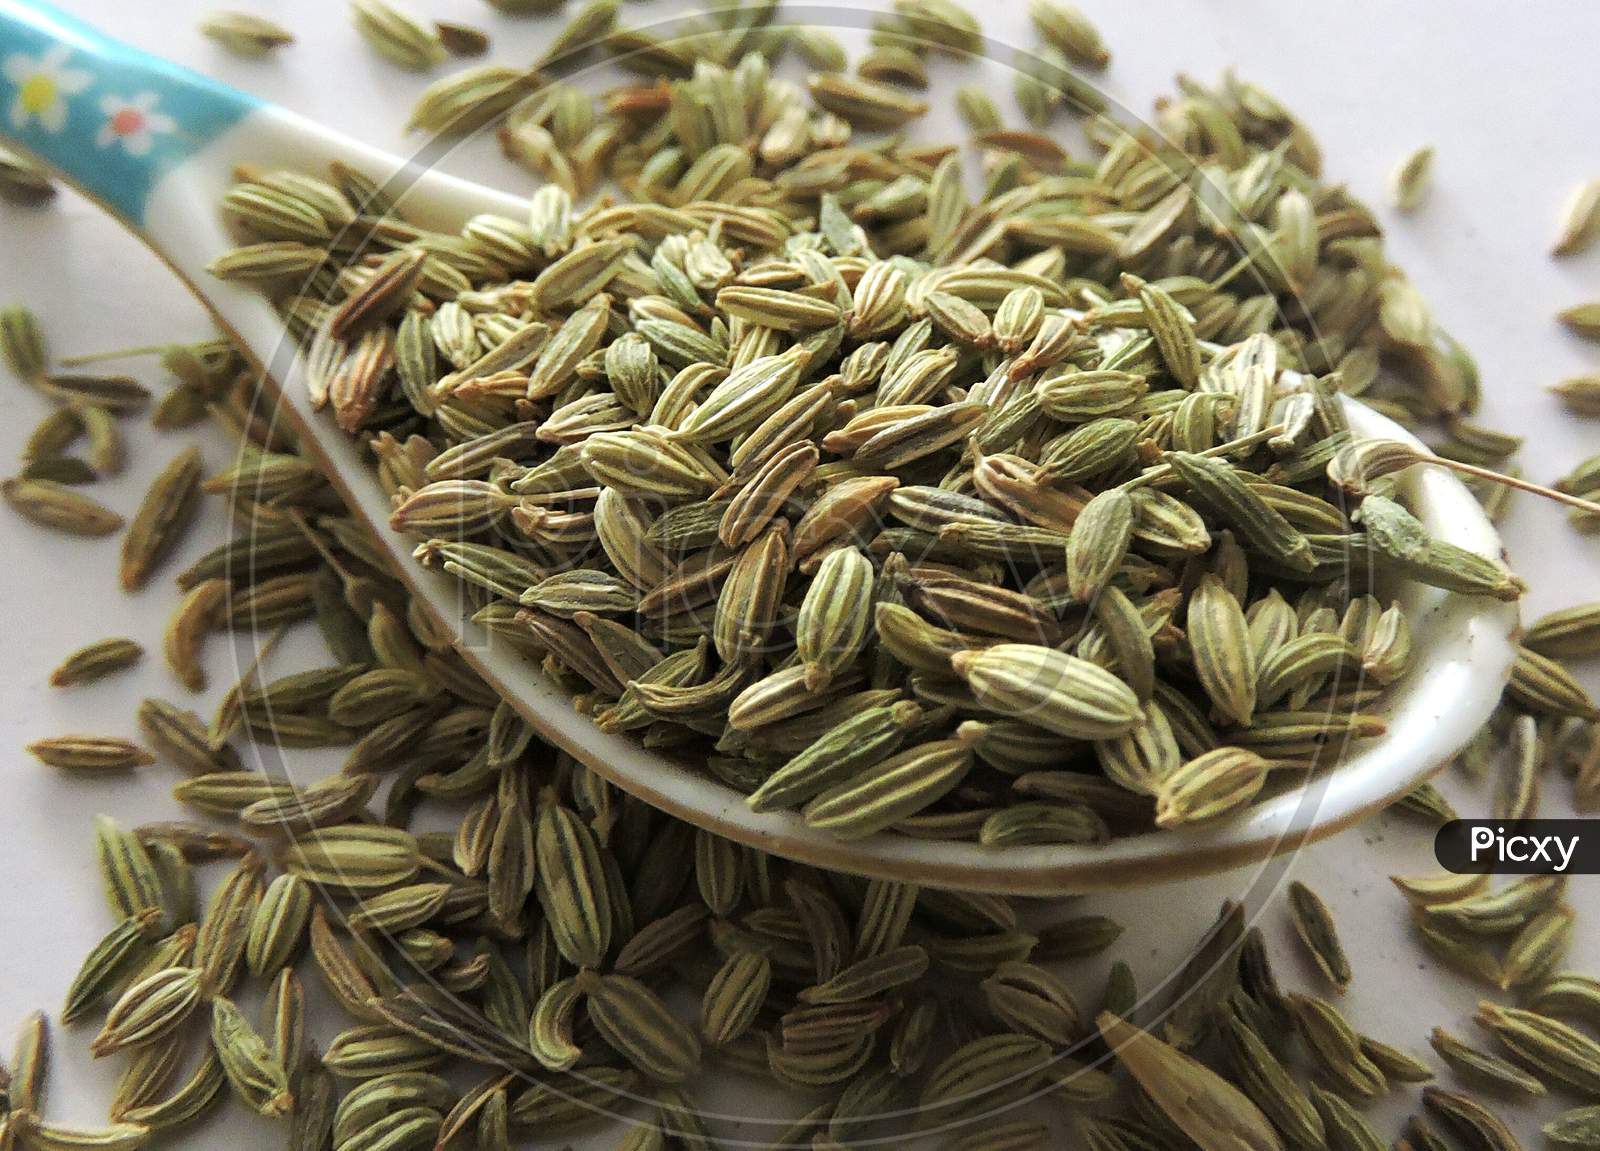 Spice - Fennel seeds